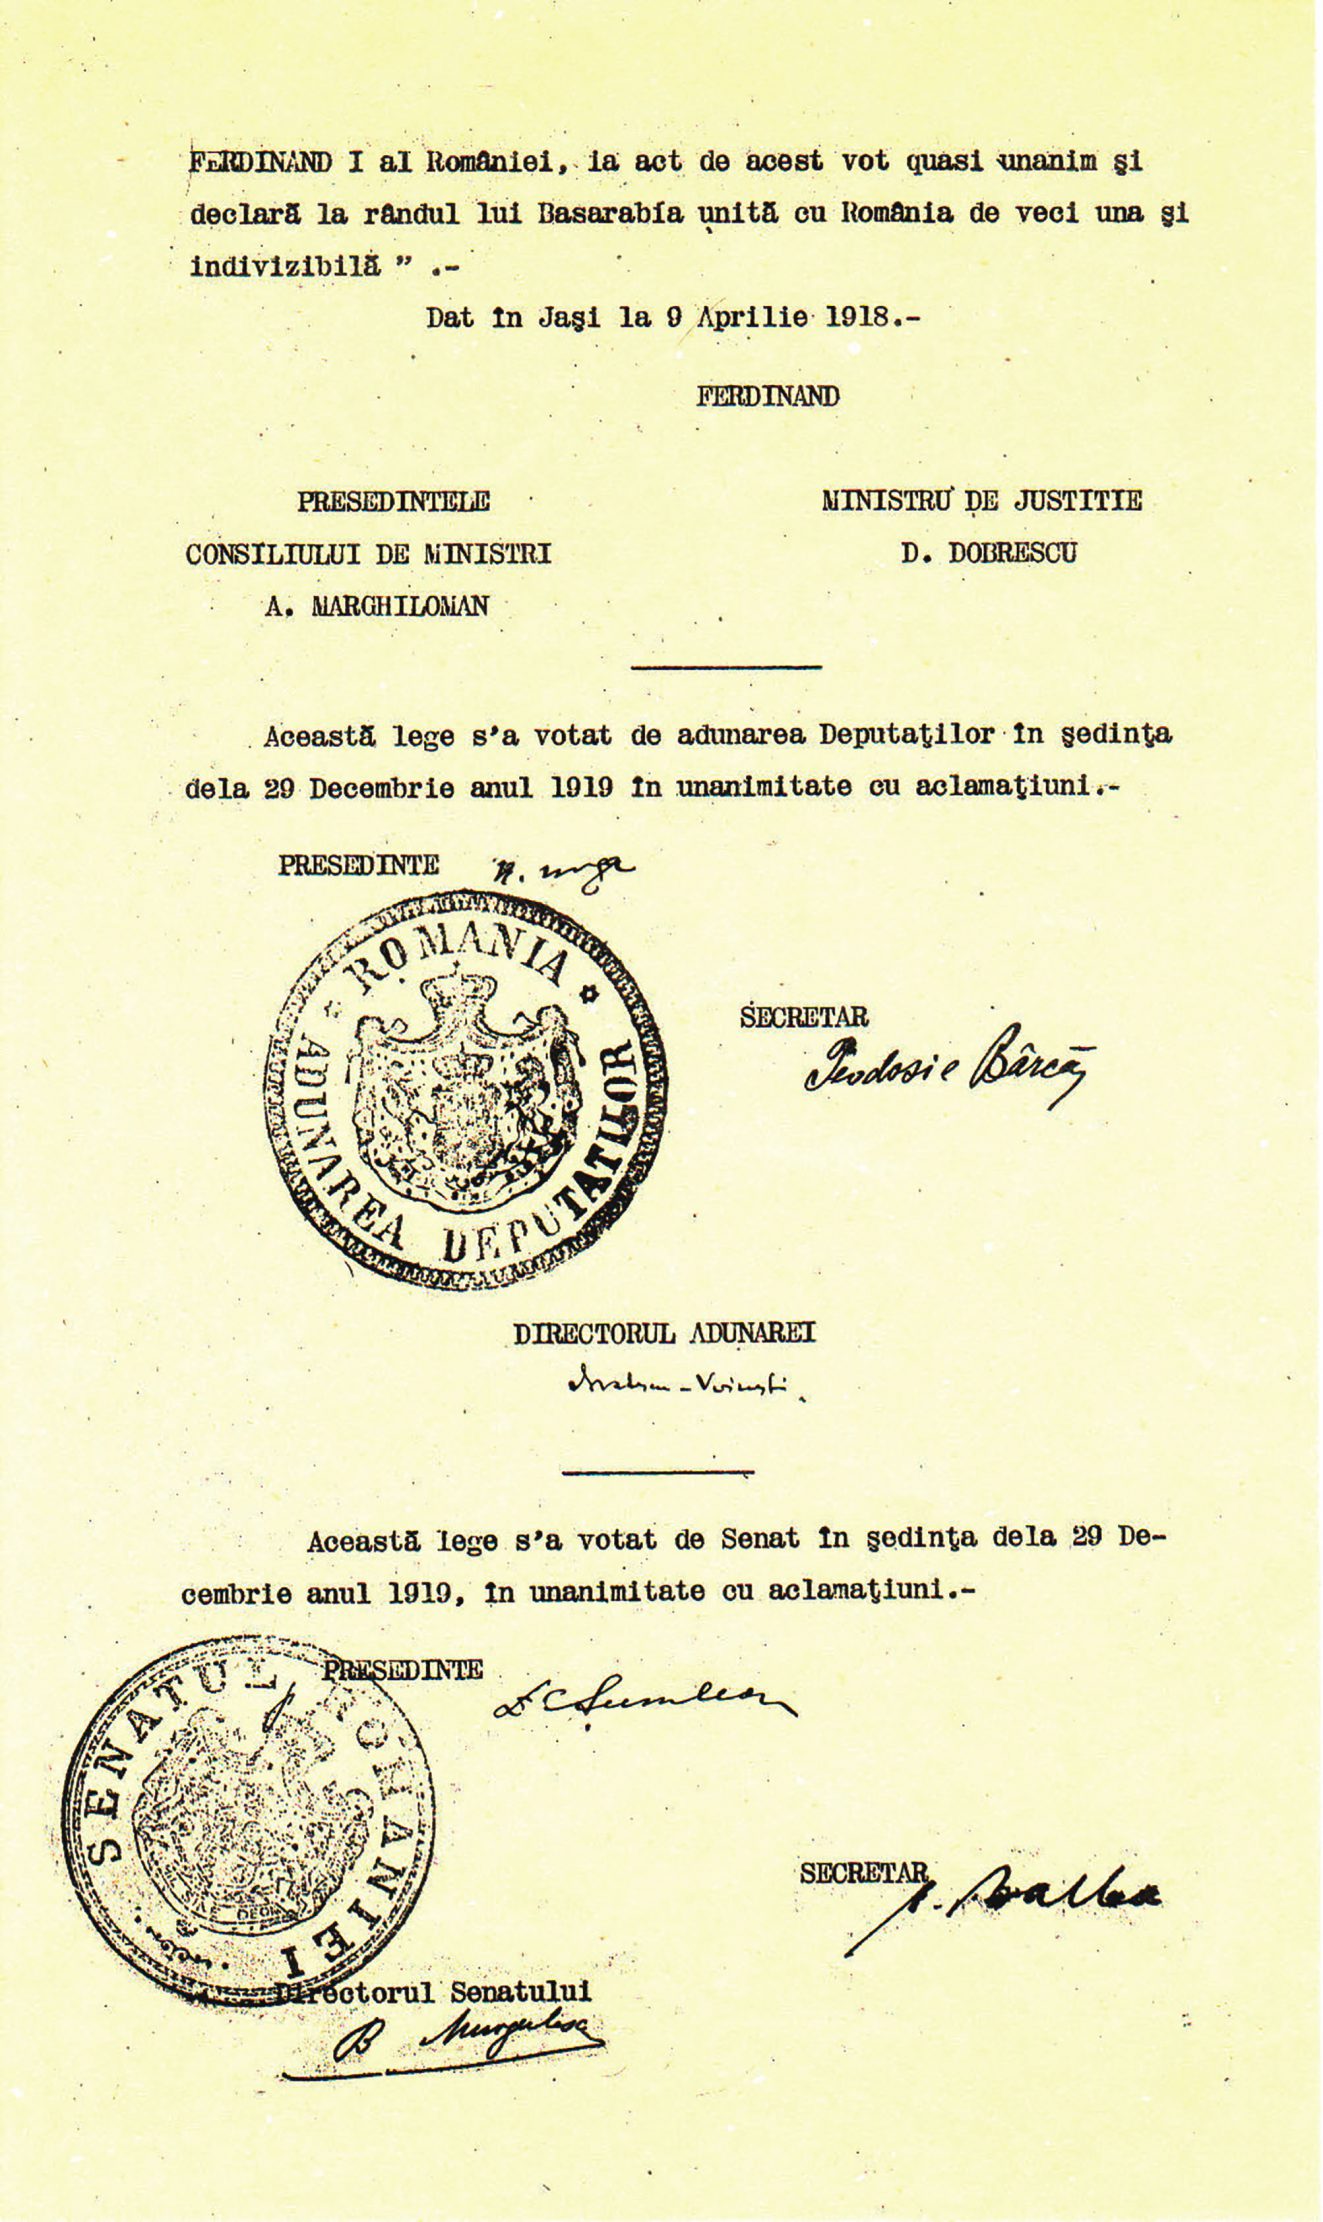  Law on the ratification of the Decree Law no. 842 of 9 April 1918 on the unification of Bessarabia with Romania. December 20, 1919 (ANR)